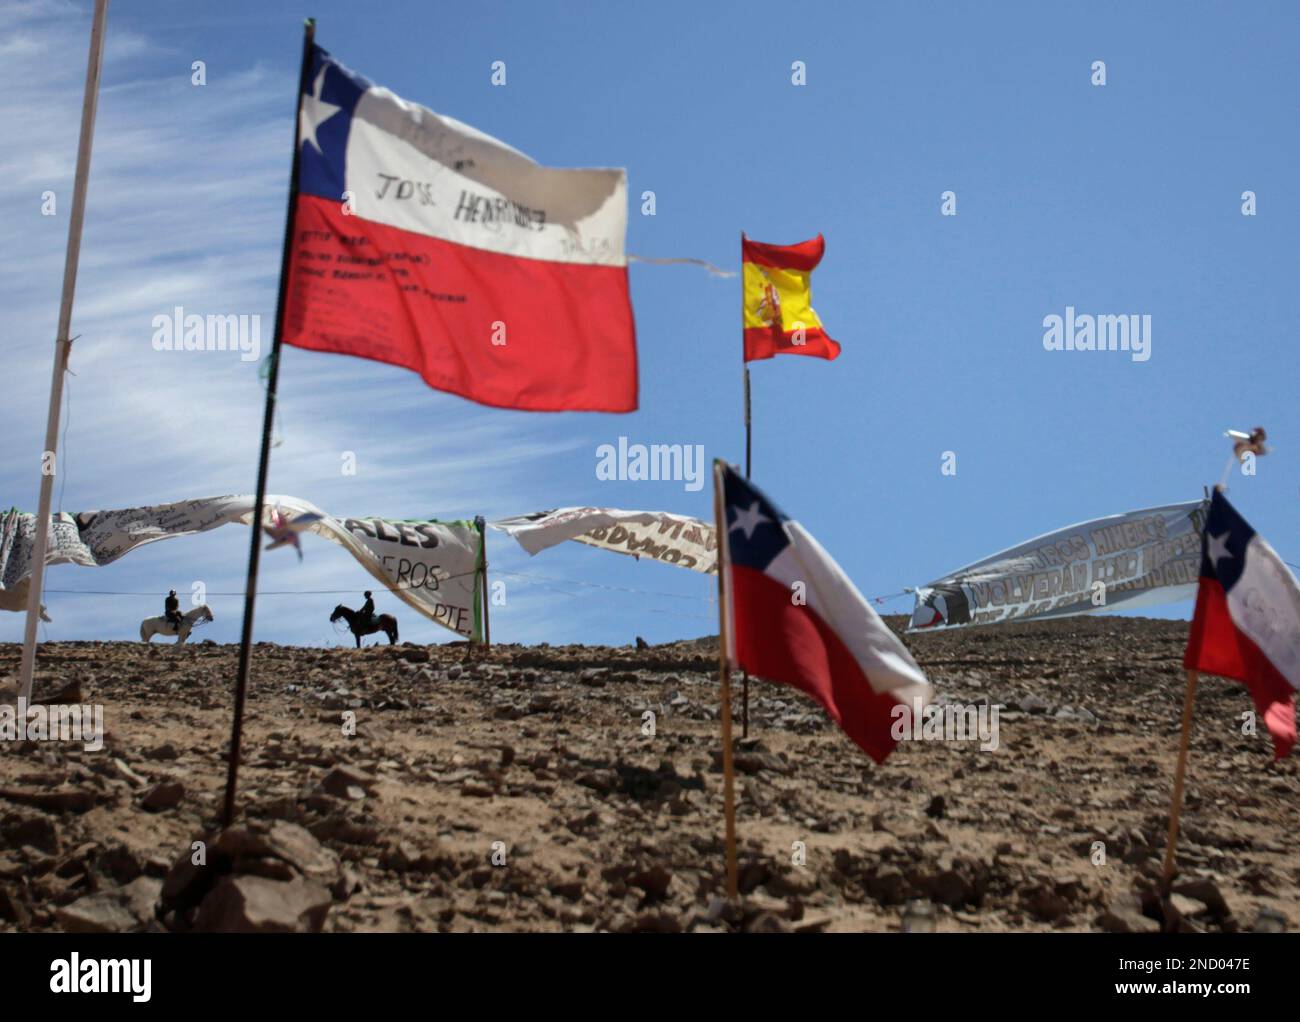 Police on horseback patrol near Chilean flags and a Spanish flag flying at  the San Jose Mine near Copiapo, Chile, Tuesday Oct. 5, 2010. Chile's  President Sebastian Pinera announced that his government